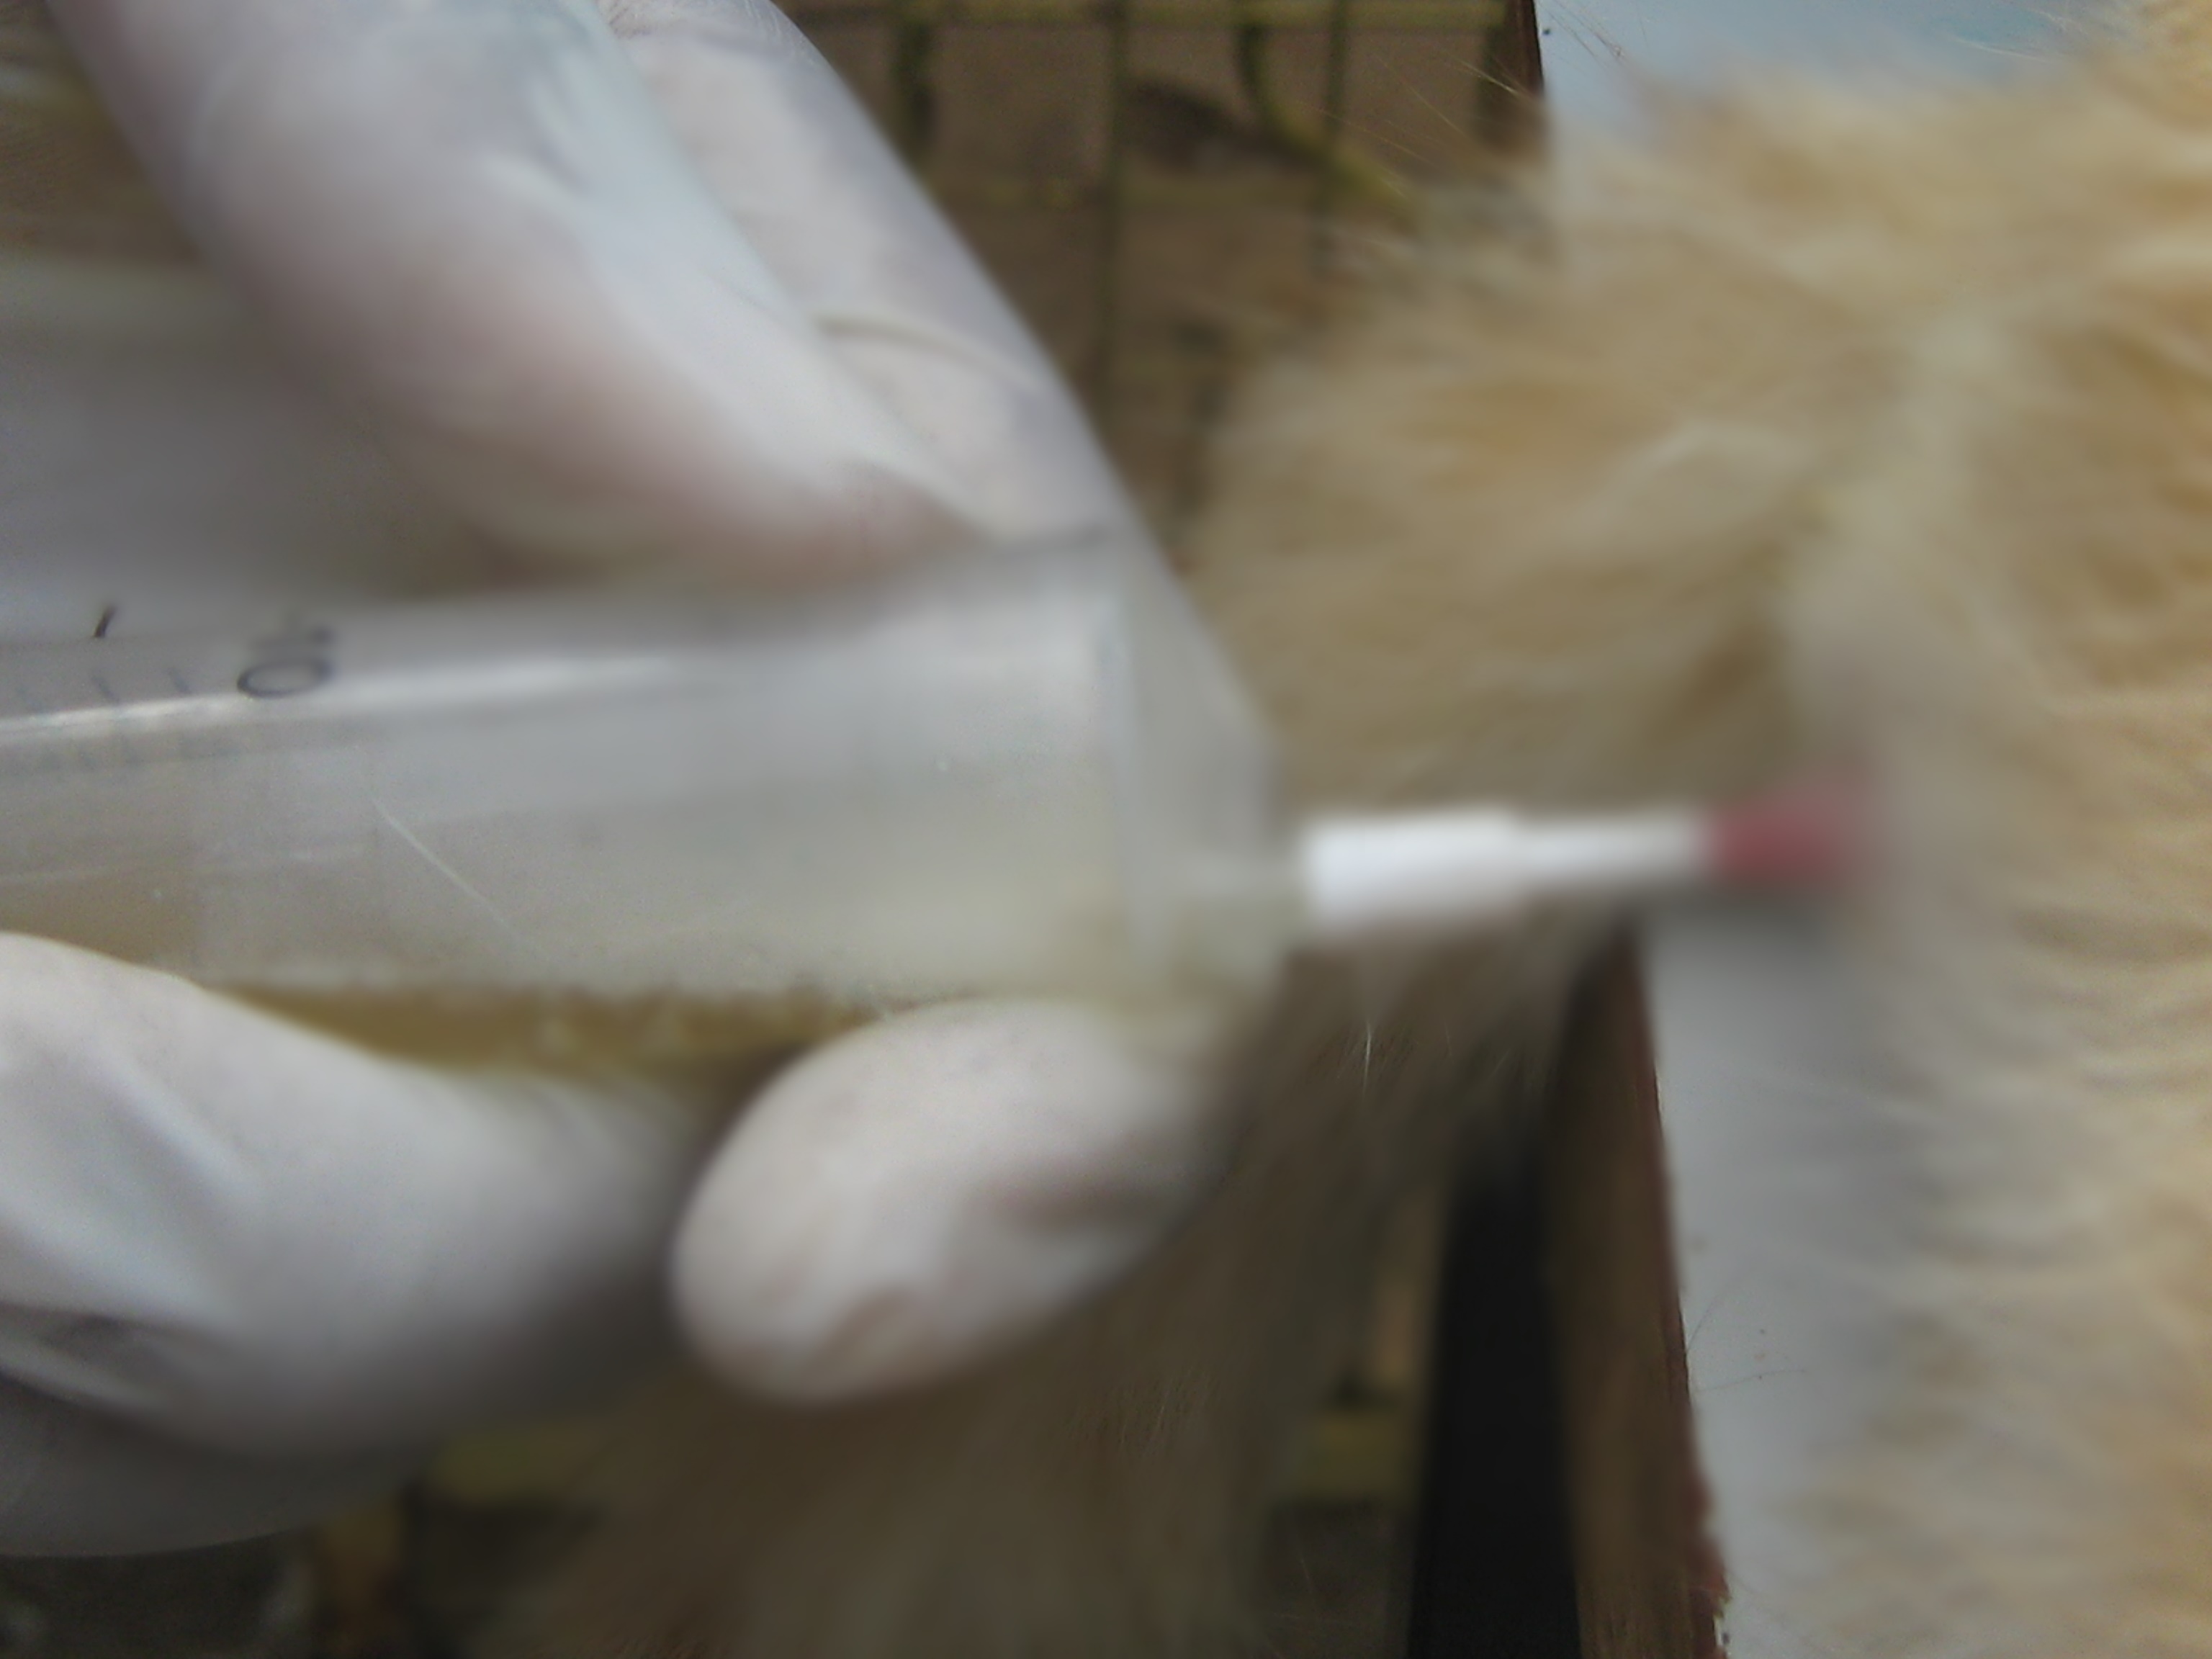 Withdrawing cat urine using a syringe attached to the urinary catheter